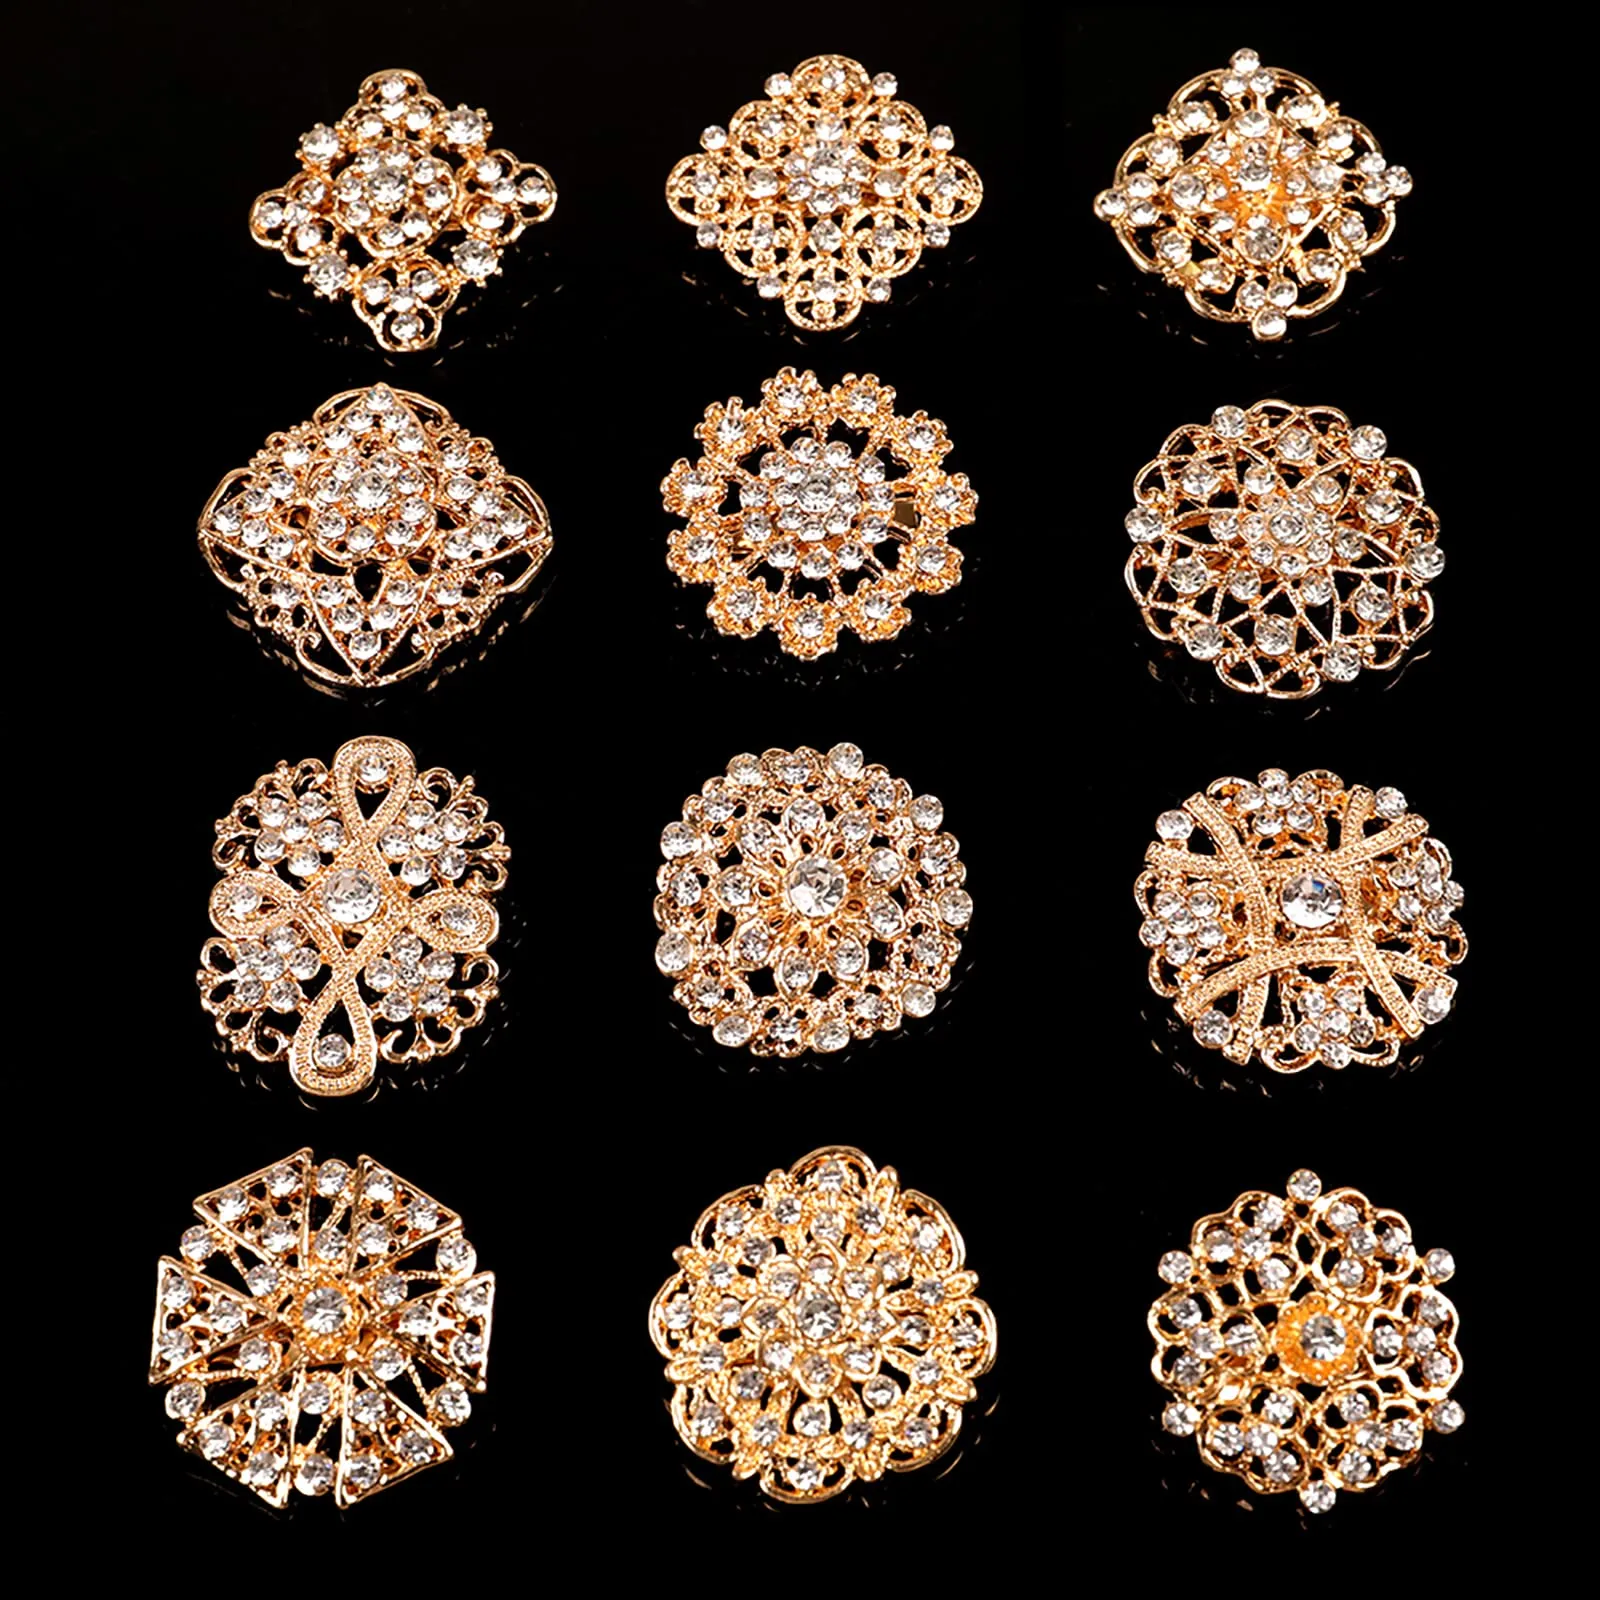 mixed rhinestone crystal brooch alloy gold vintage assorted brooch pins set for wedding bouquet party gift craft diy